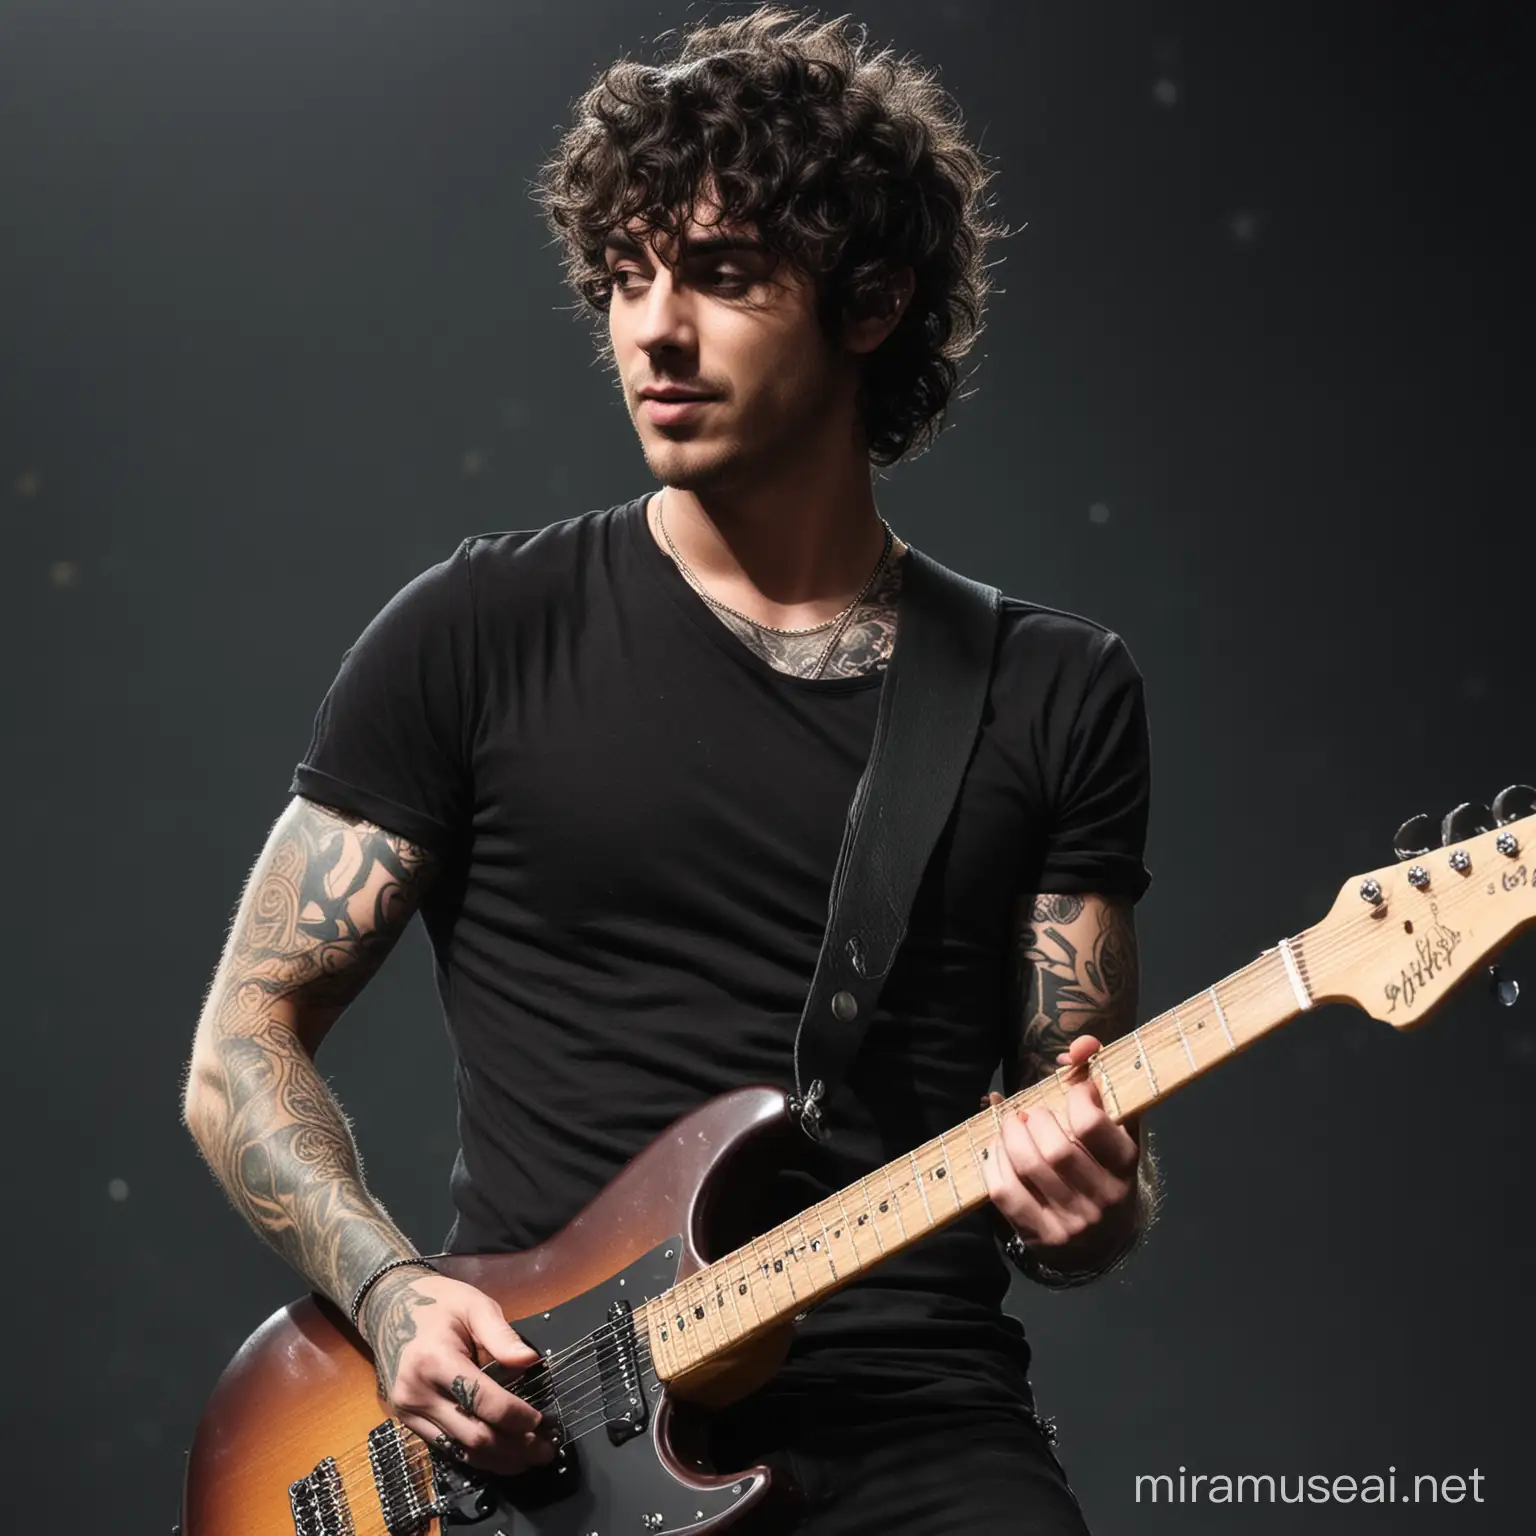 Generate an image of a front man of a rock band, he looks like a combination of Taylor York and Oli Sykes, he has dark curly hair, he is muscular but lean, he plays guitar, he is on stage,